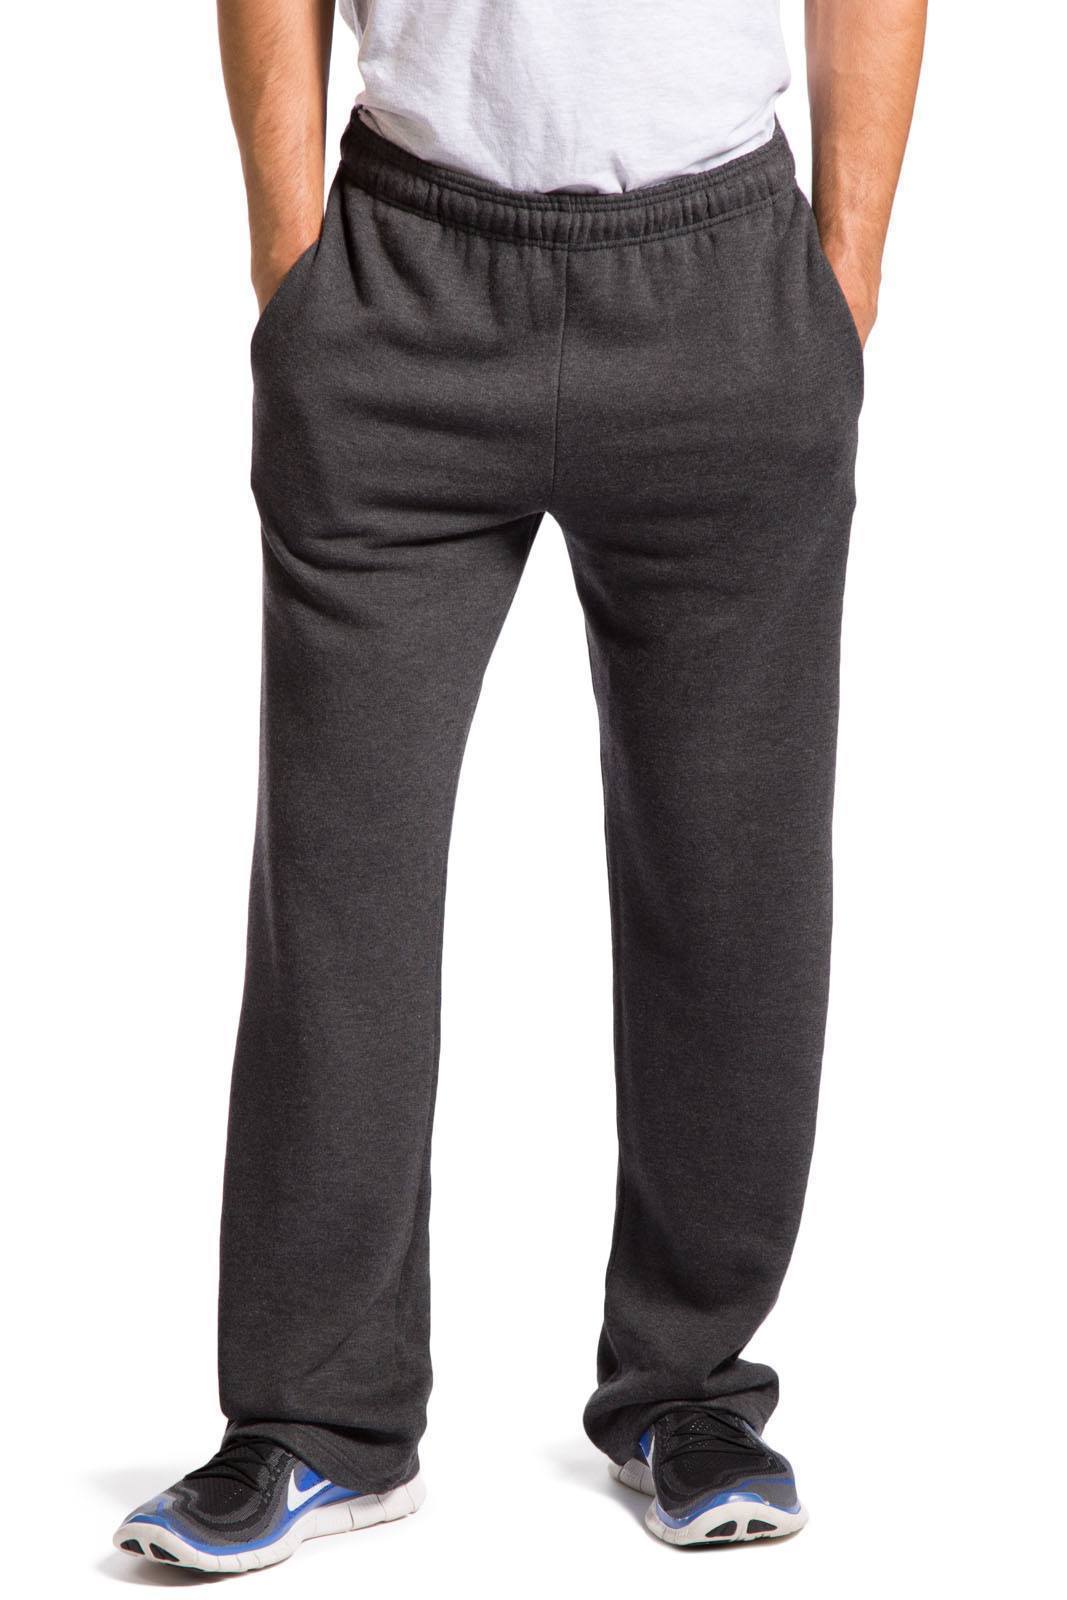 Mens Sweatpants | Ecofrabic Mens Athletic Pants | Fishers Finery